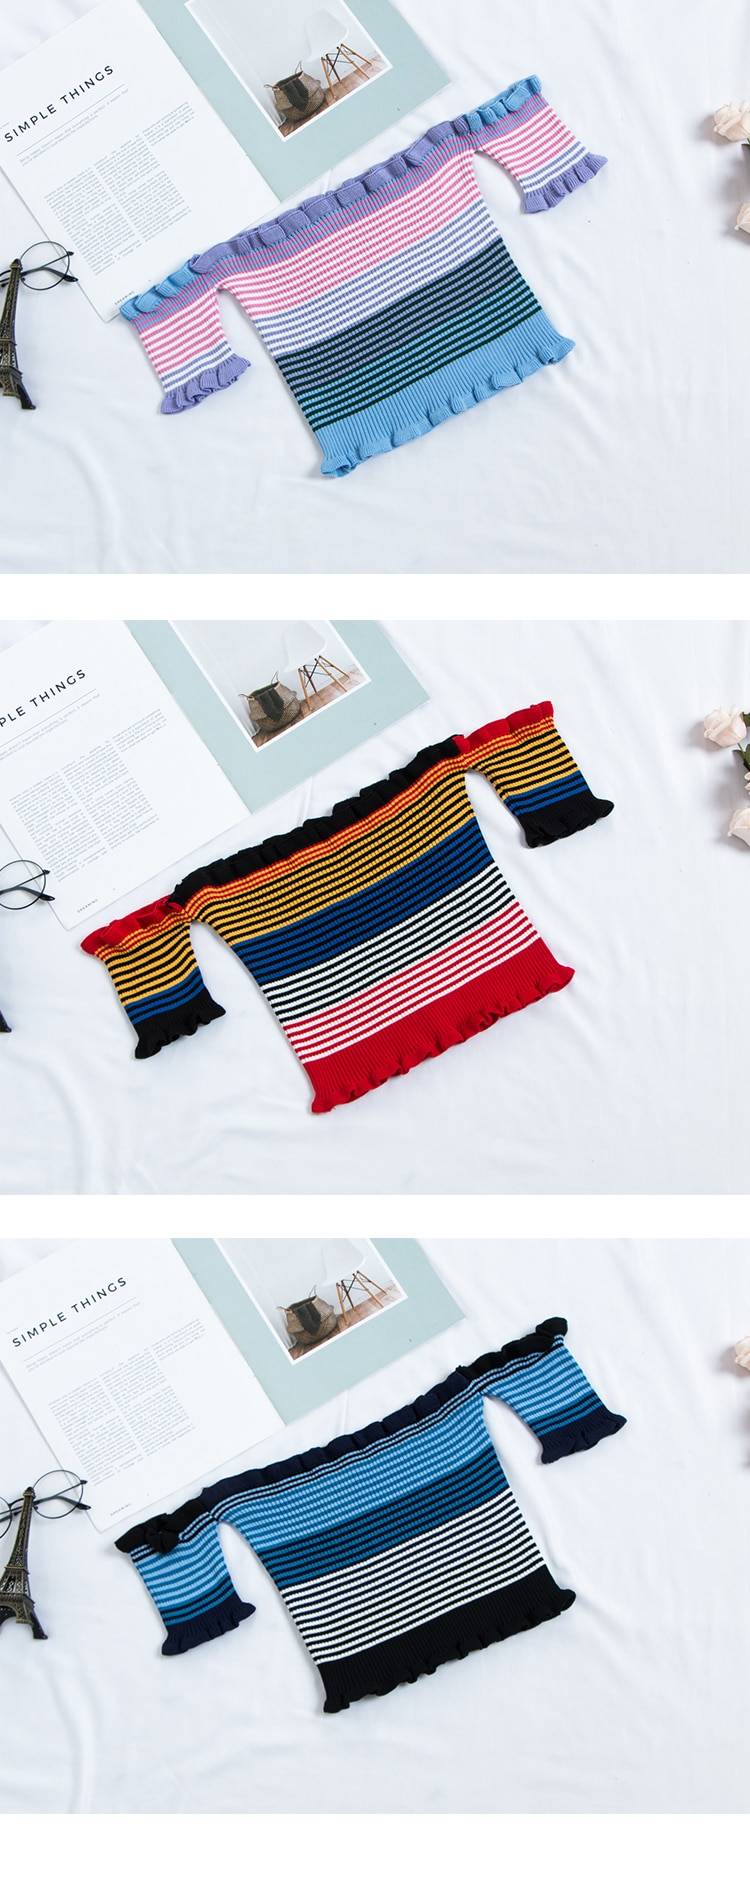 Rainbow Striped Crop Top - Kawaii Stop - Butterfly Sleeve, Camis &amp; Tops, Casual, Cute, Fashion, Harajuku, Japanese, Kawaii, Knitted, Korean, Polyester, Short Sleeve, Slash Neck, Streetwear, Striped, Top, Tops &amp; Tees, Women's Clothing &amp; Accessories